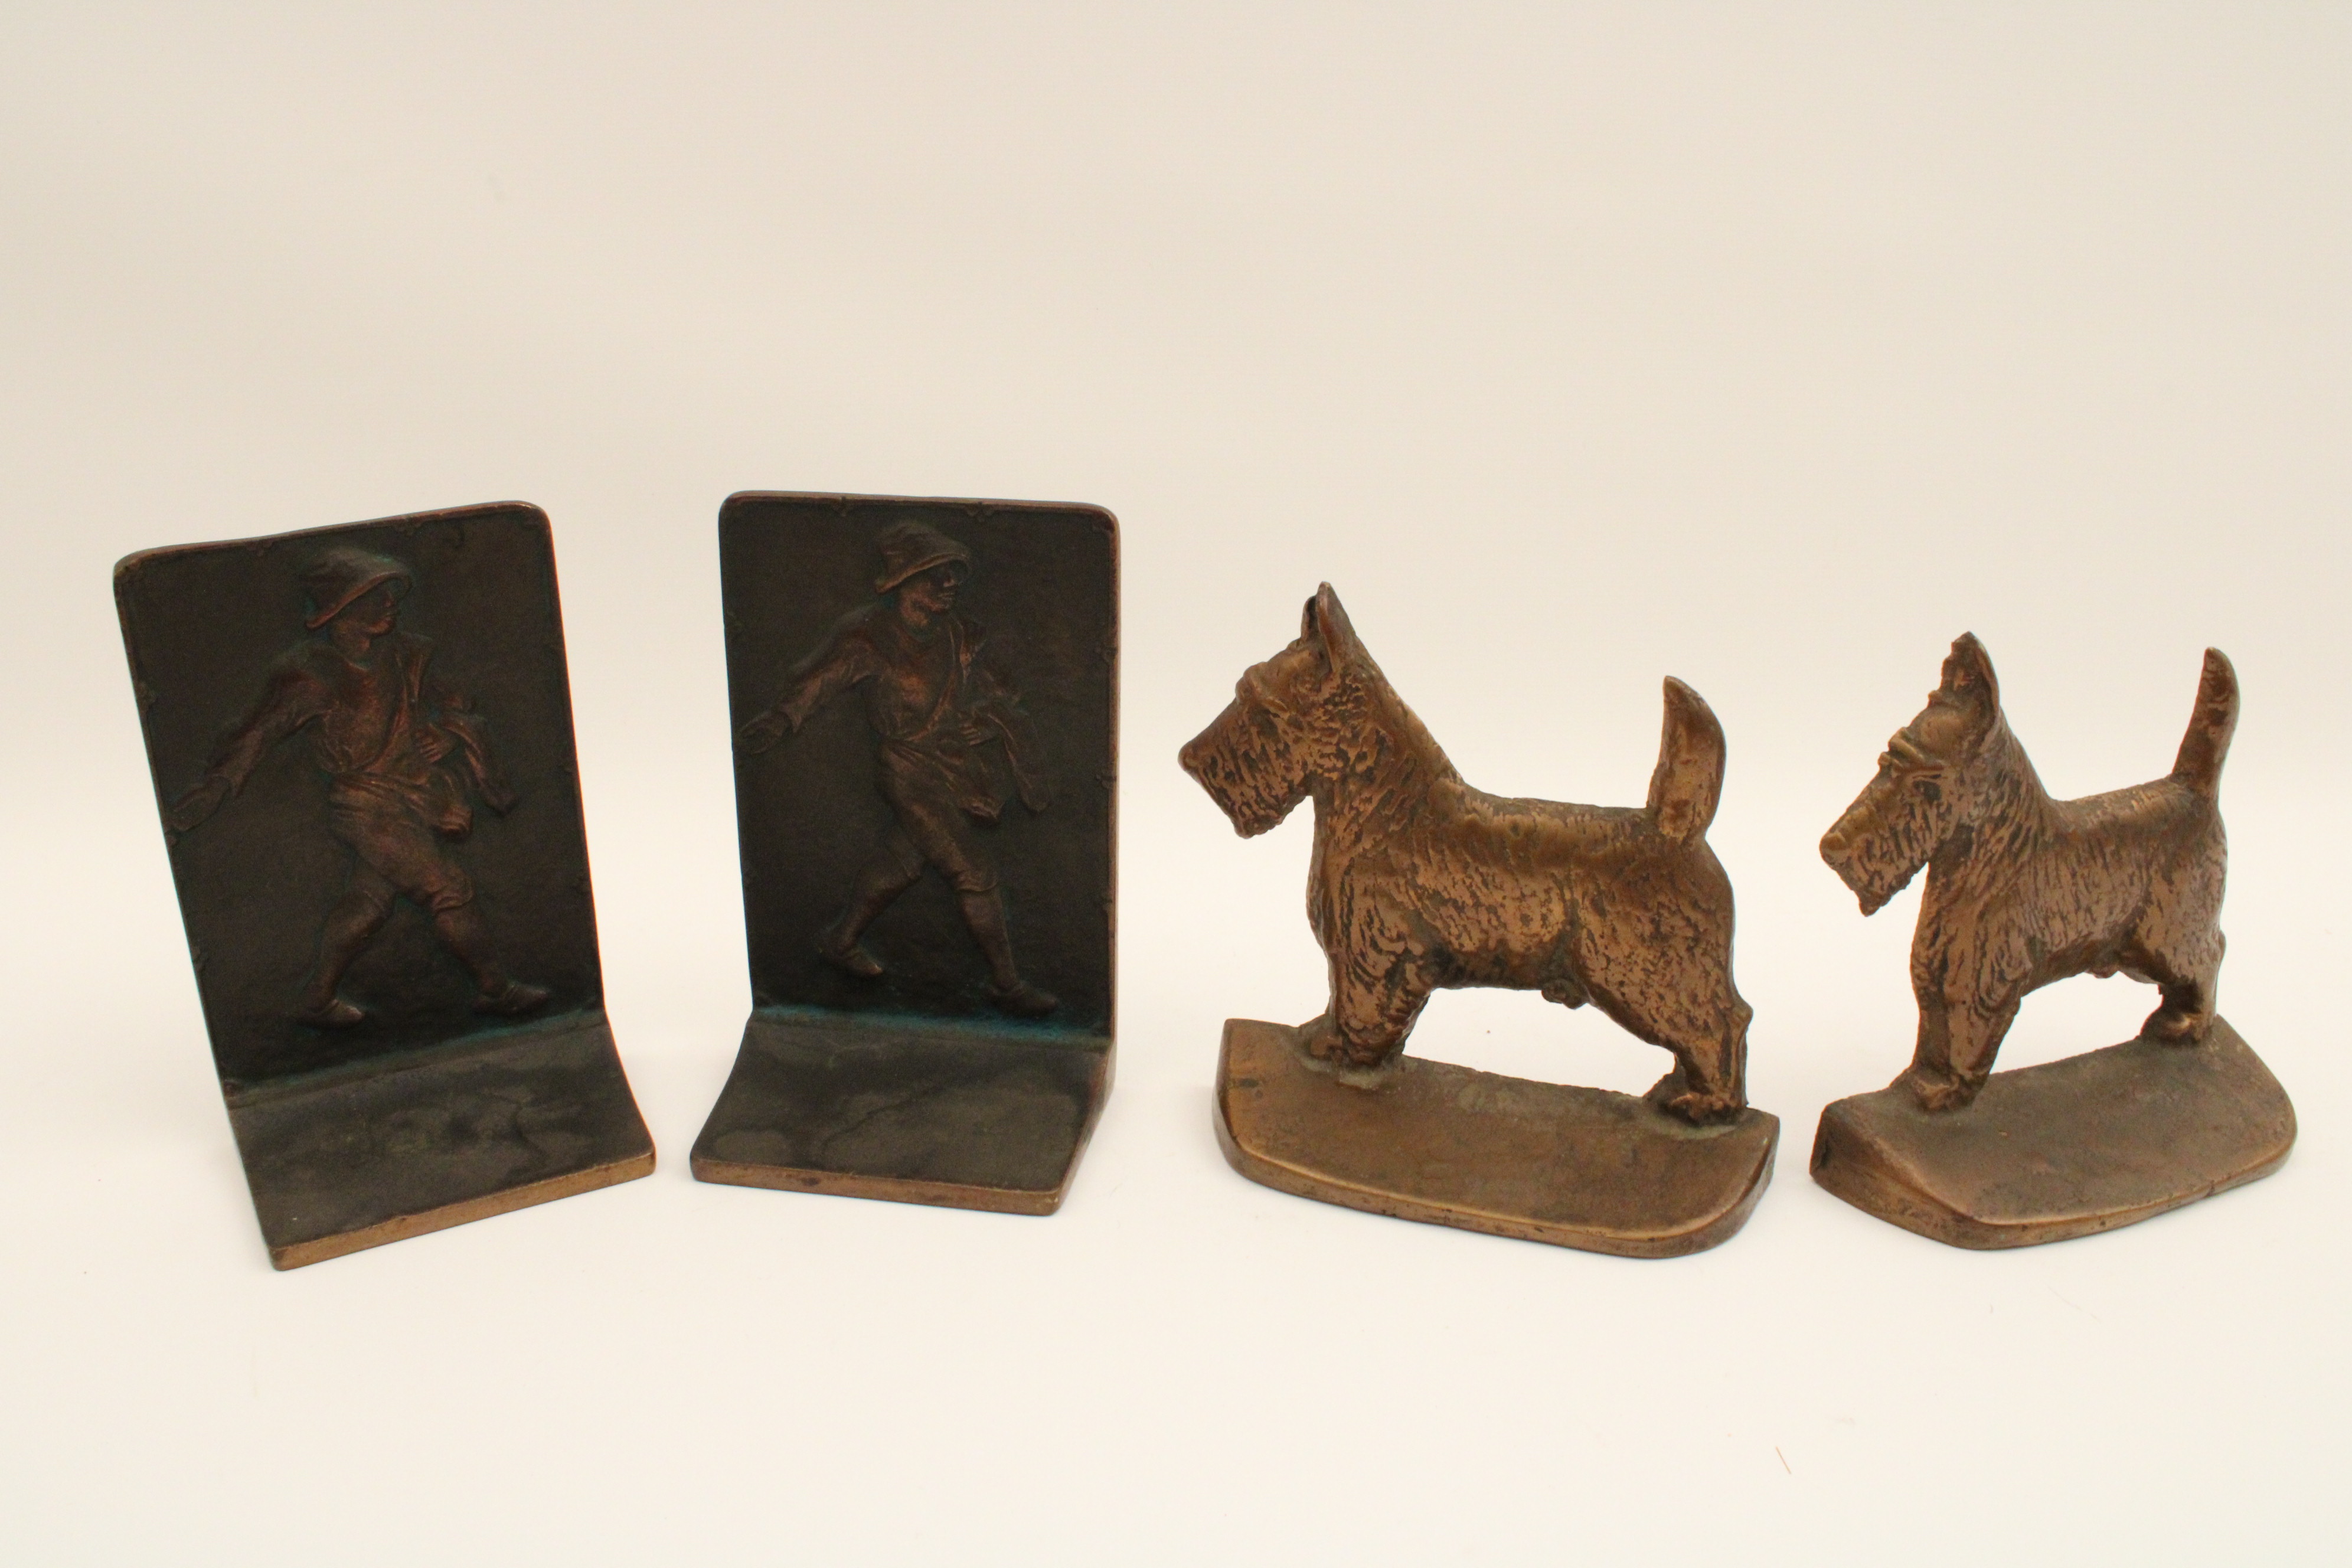 2 PAIRS OF BRONZE BOOKENDS TWO 35f924